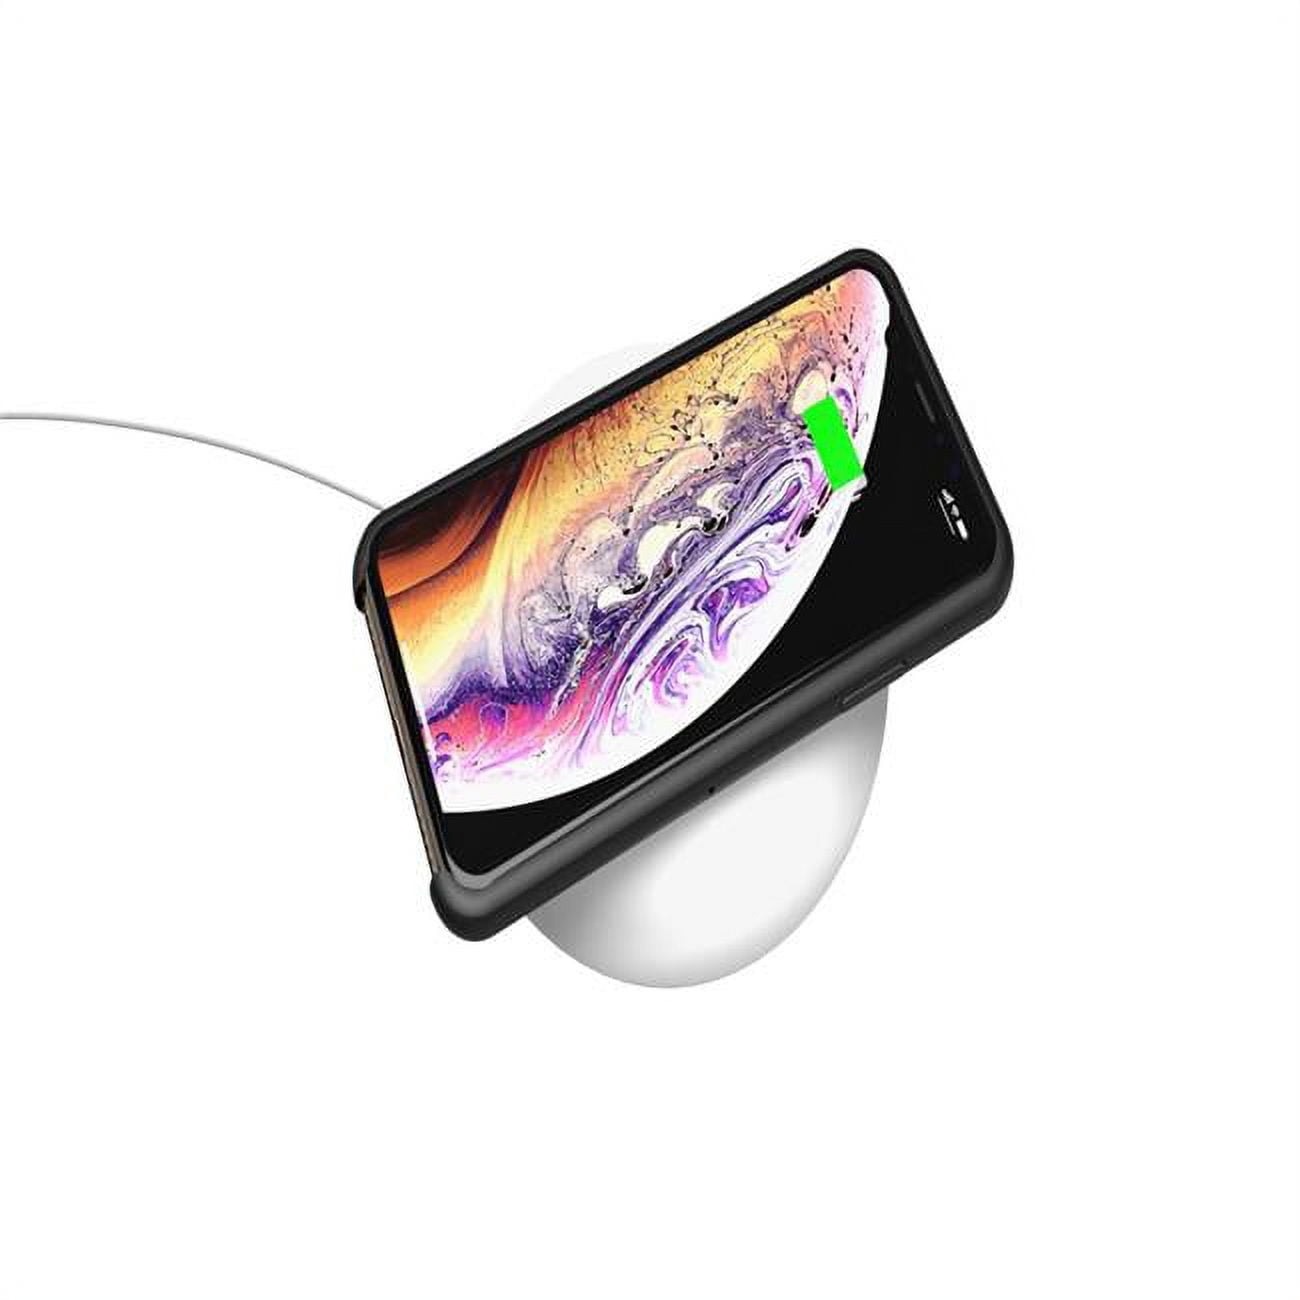 Picture of Adam Elements APAADQWH OMNIA Q Qi Fast Wireless Charger with LED Light Feature, Multi Color